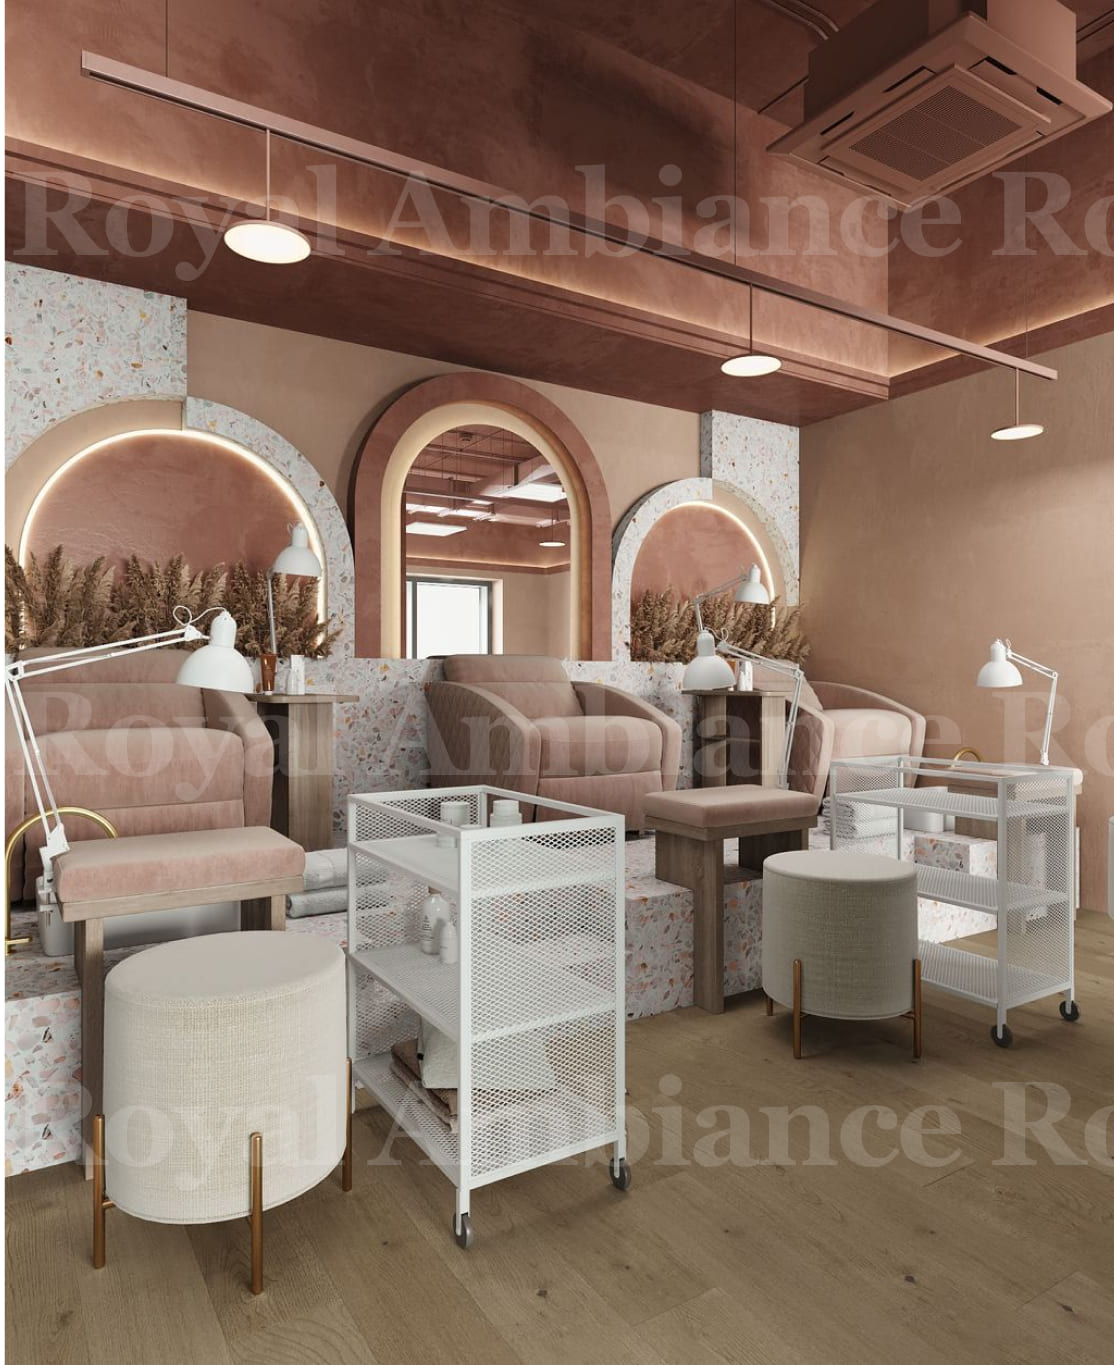 ITS BEAUTY ladies nails and haircutting salon design fit-out and joinery pedicure station chairs